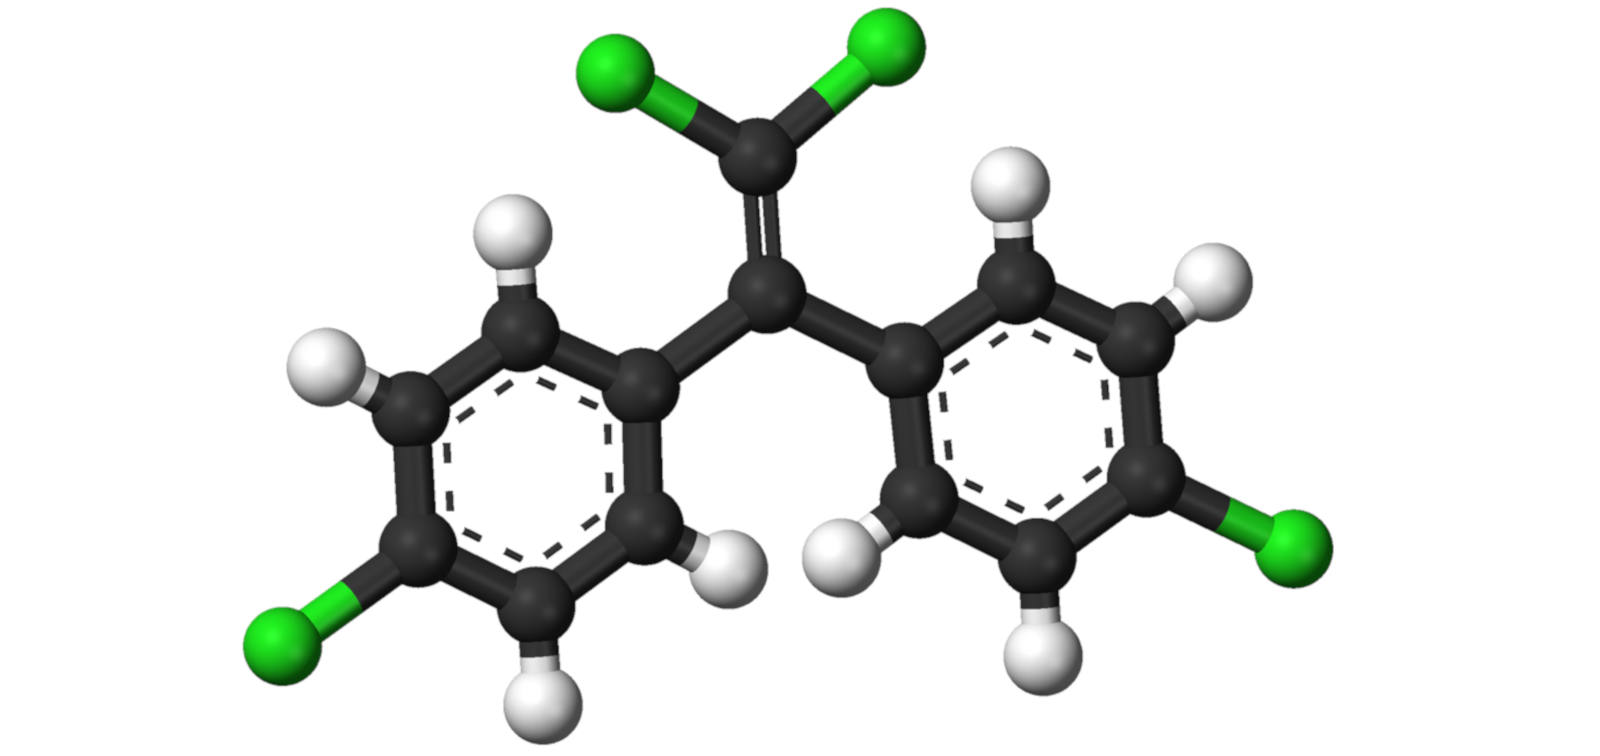 Ball-and-stick model of the DDE molecule